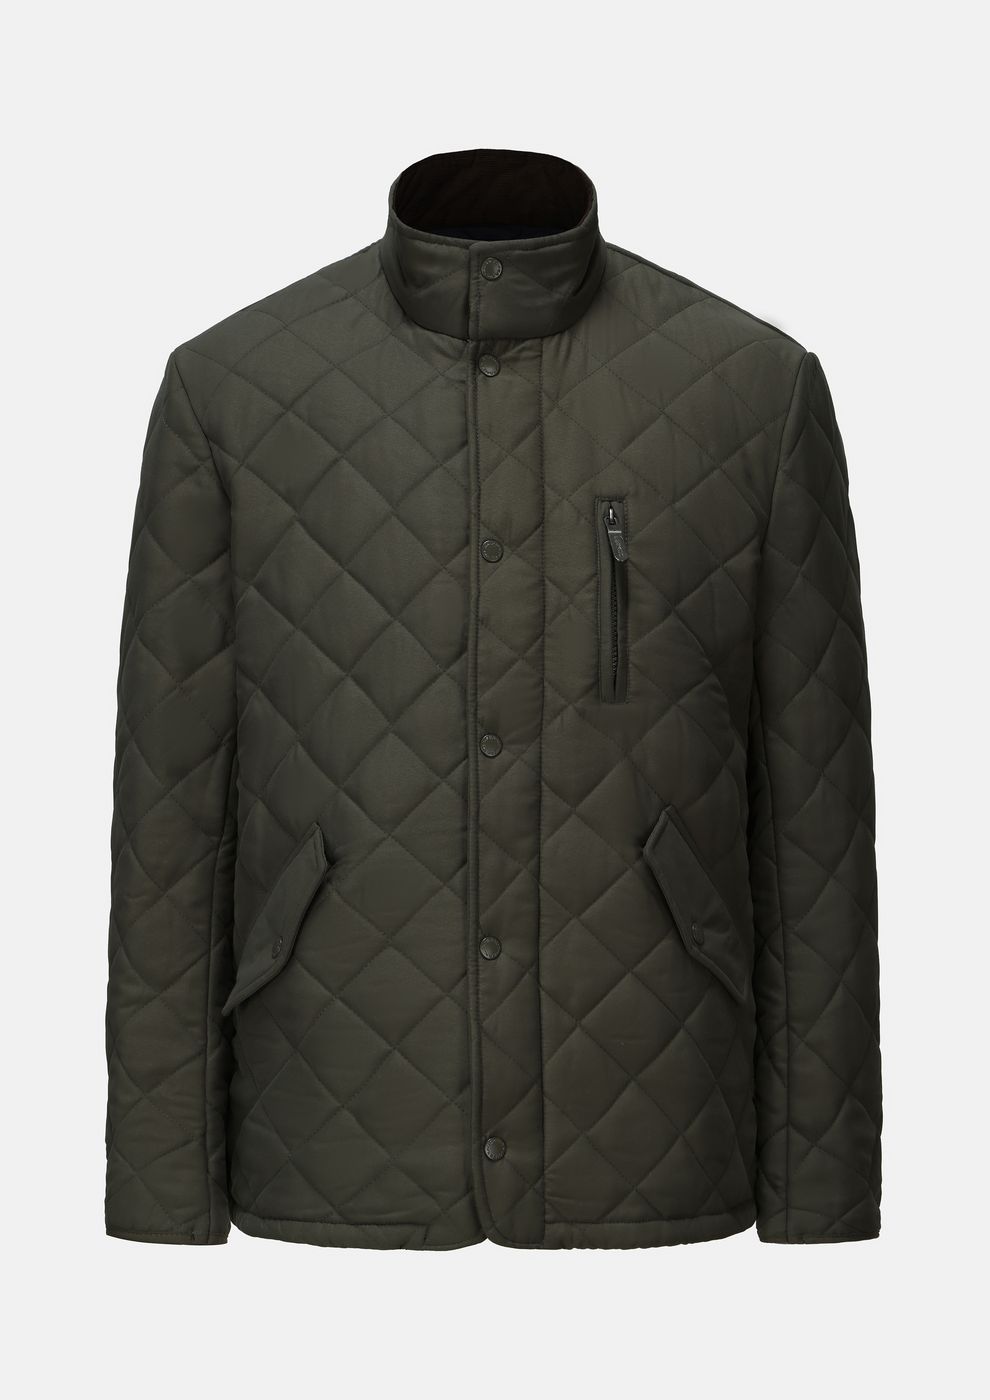 Feraud Jeans Prima Quilted Jacket – Gianni Feraud